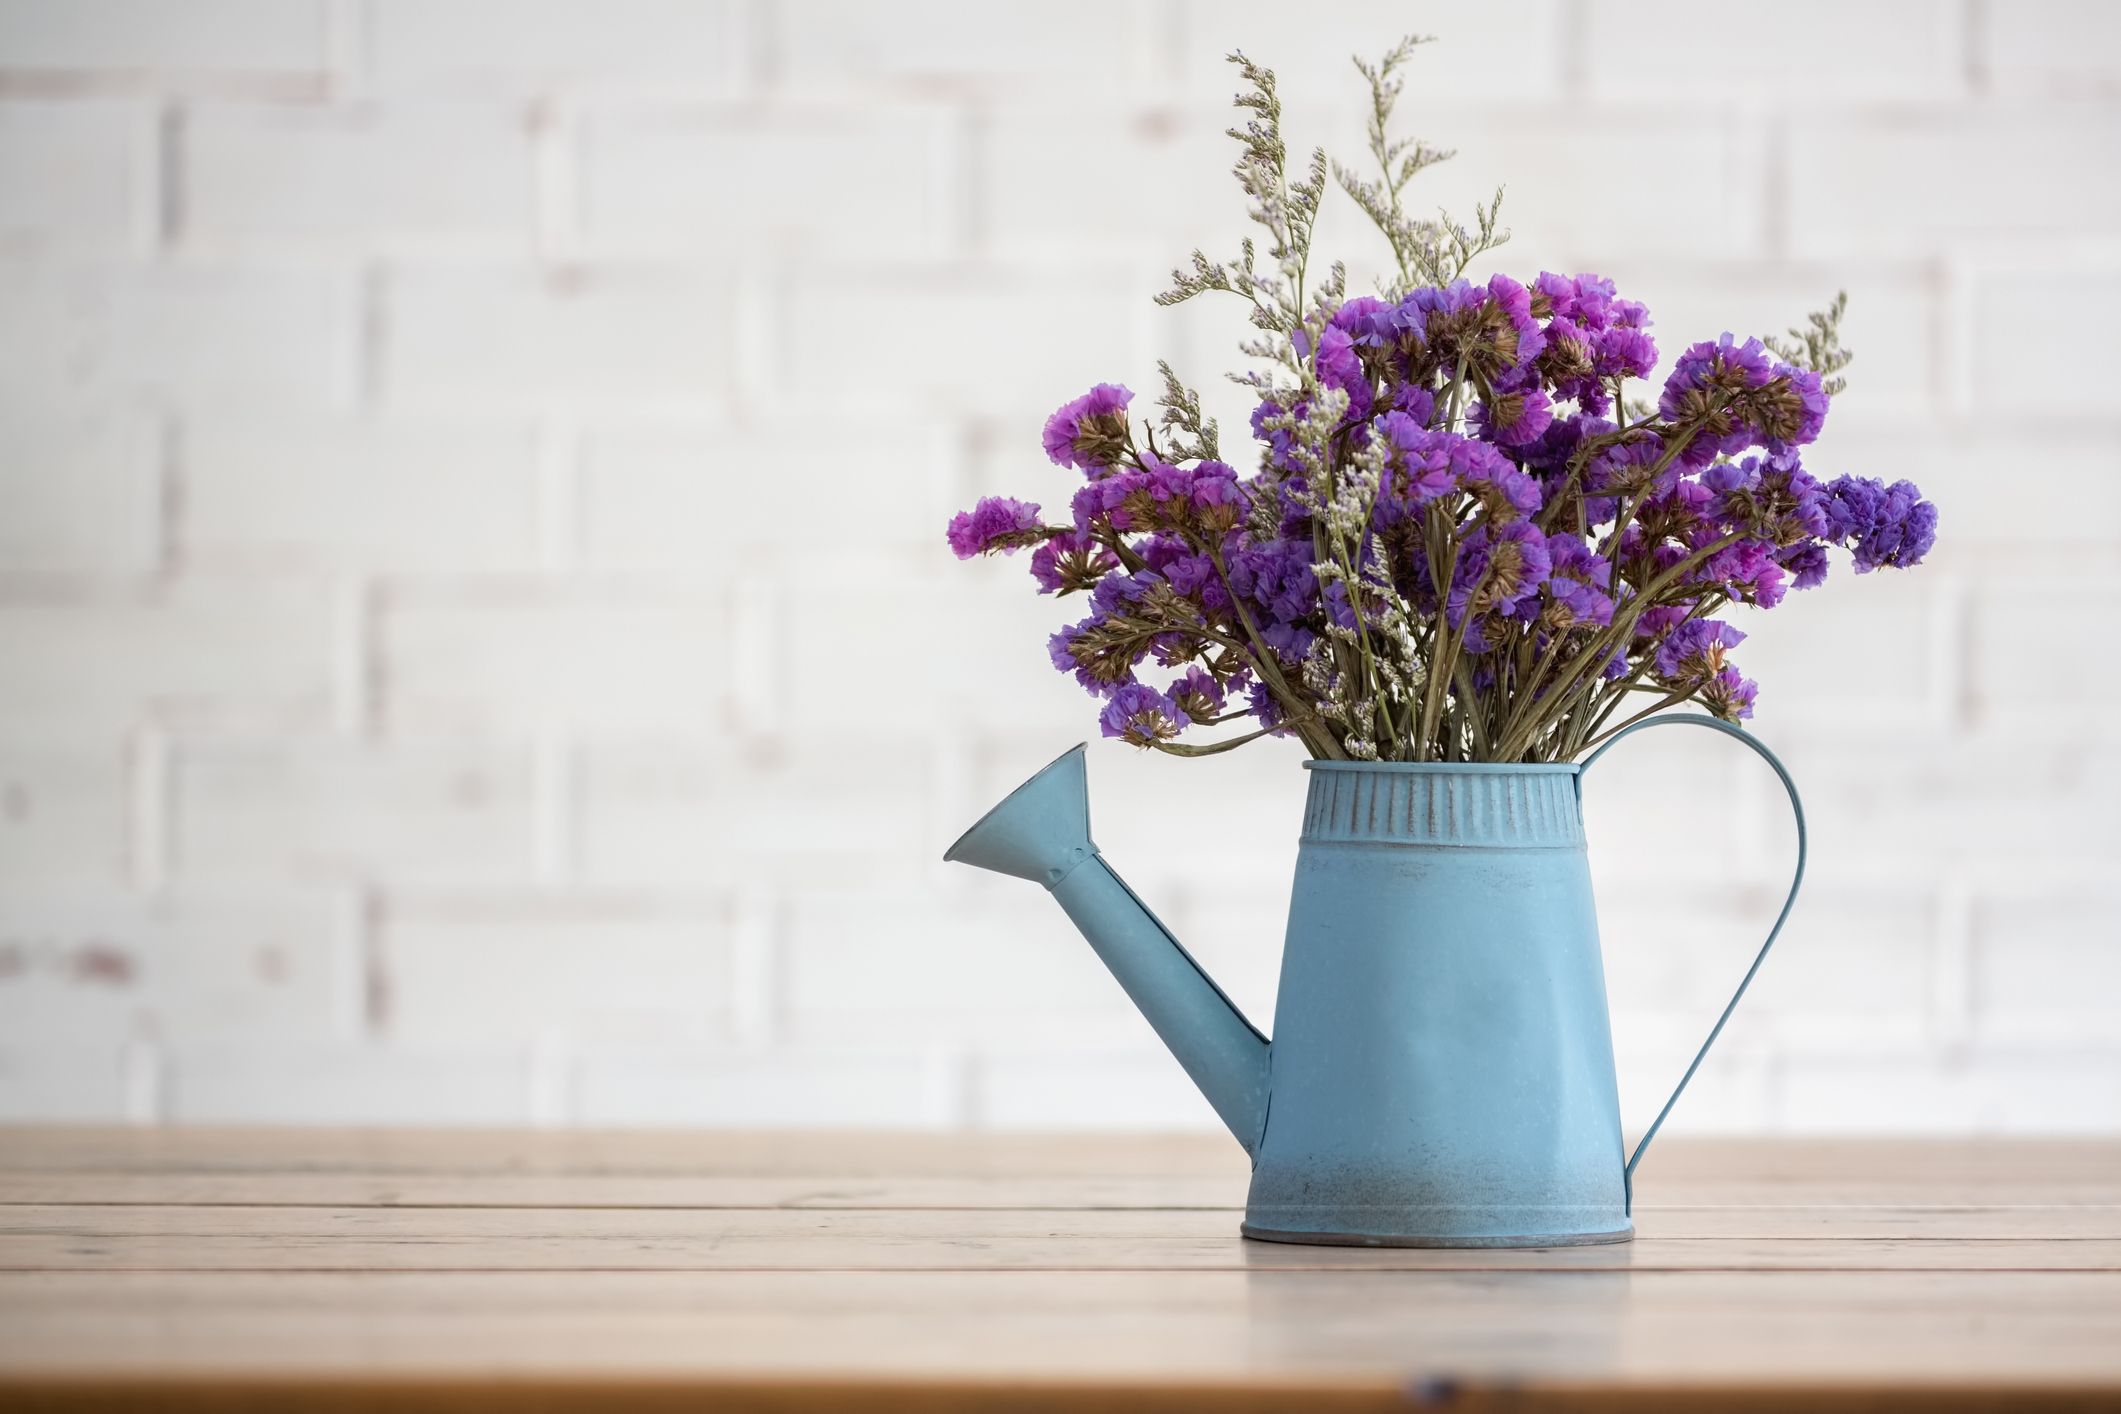 Top tips for the best way to dry flowers from your garden